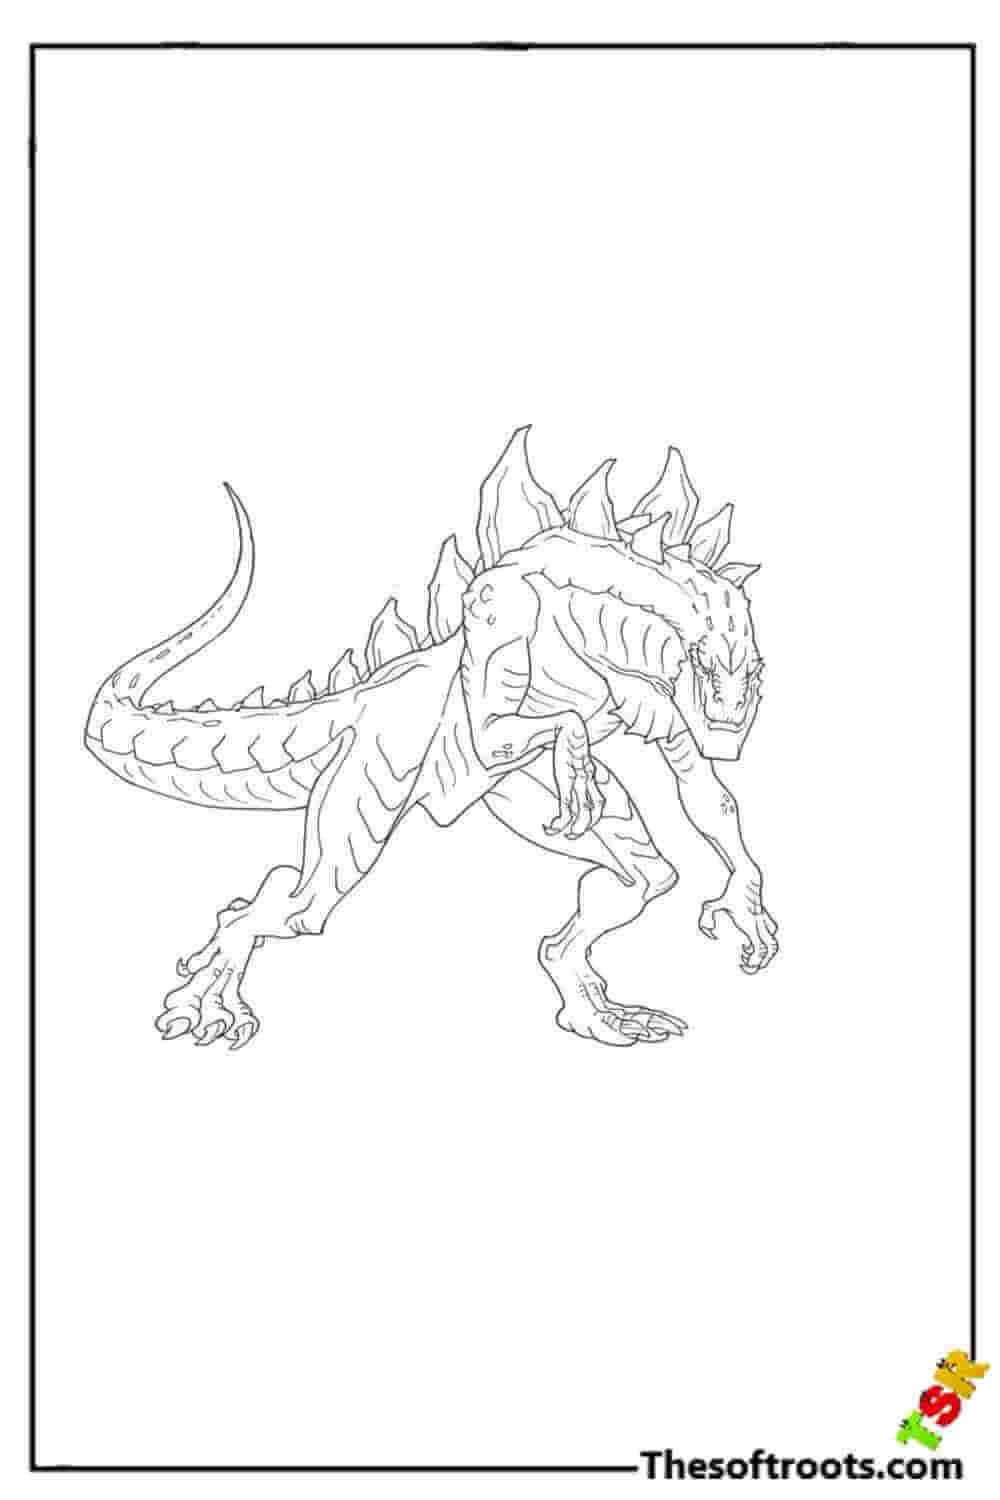 Godzilla Monster coloring pages